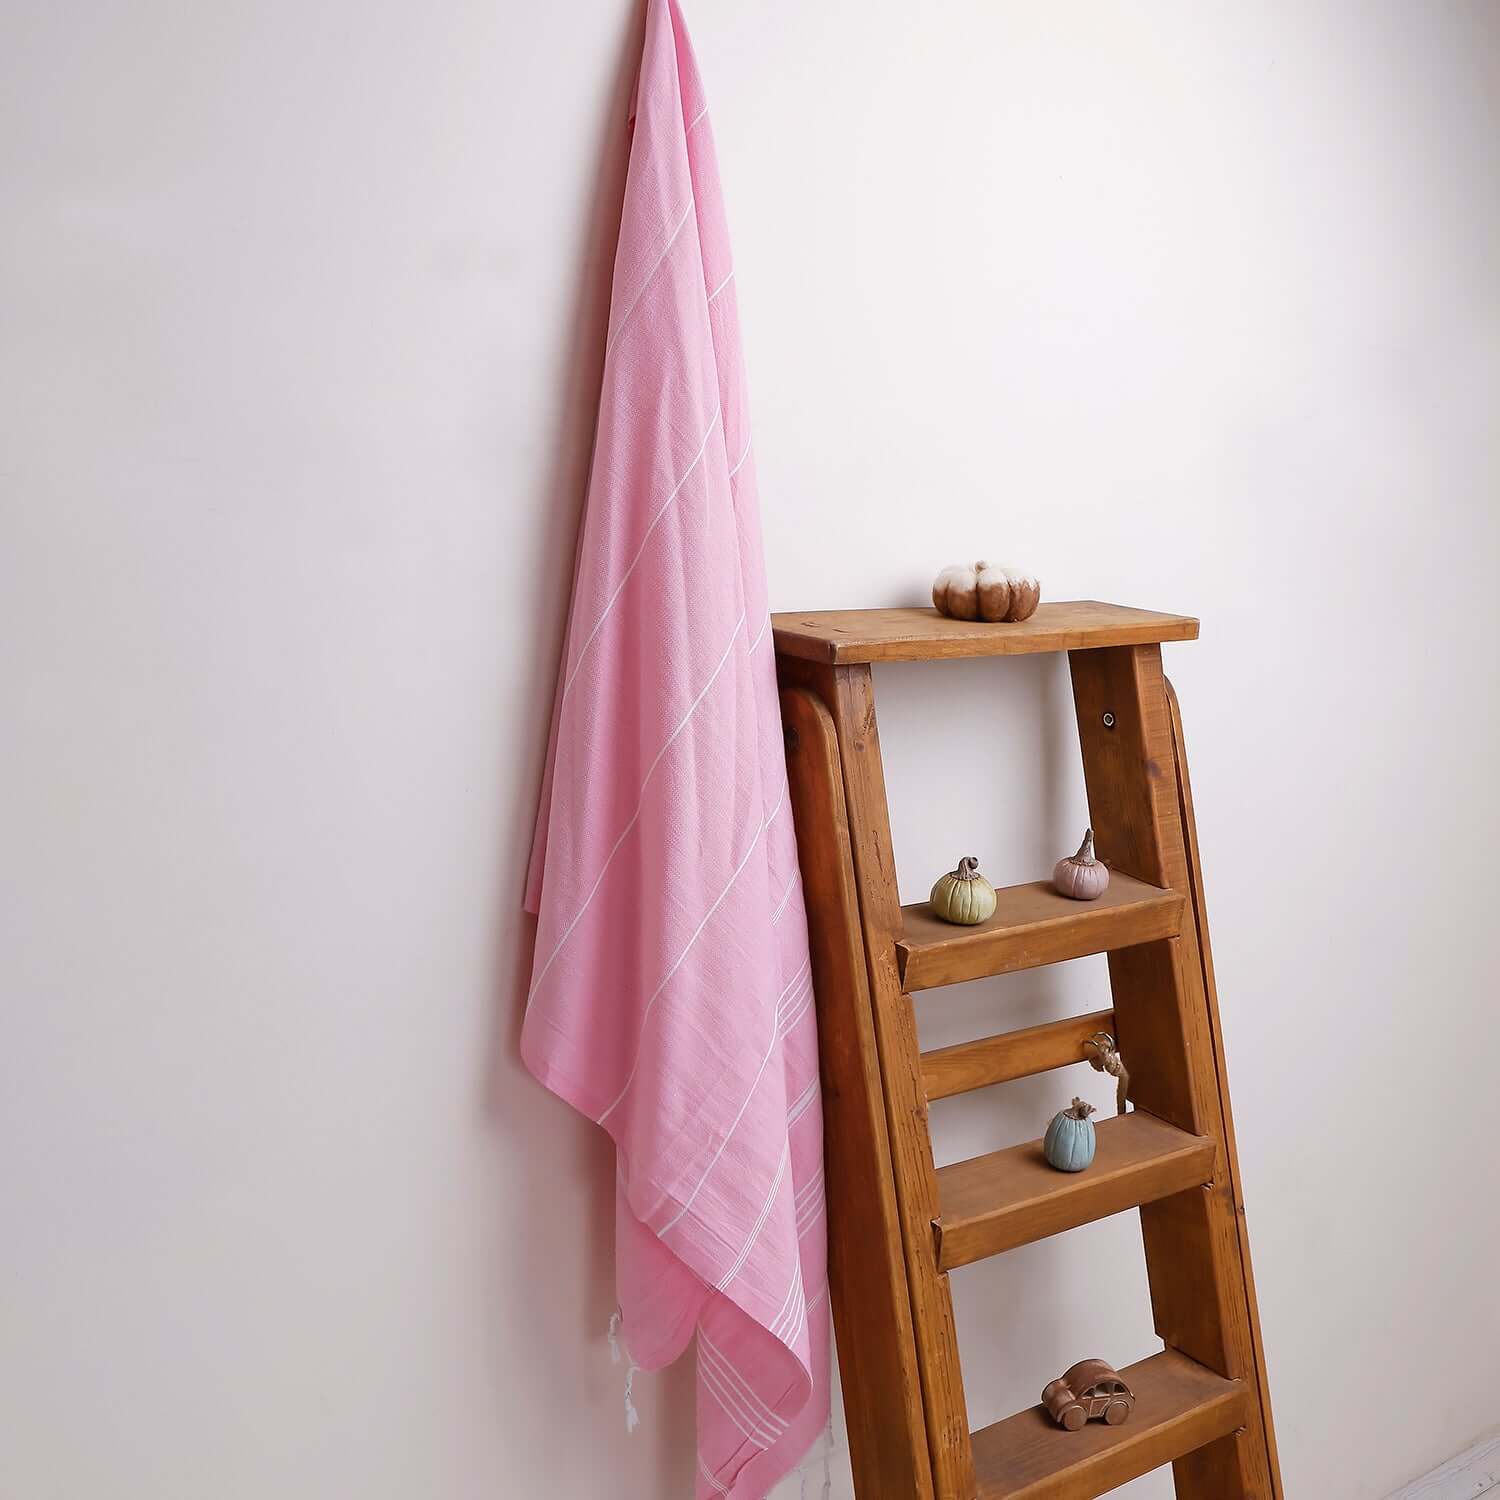 Loom Legacy pink striped beach towel with tassels, draped over a wooden ladder beside small decorative items on the shelves.